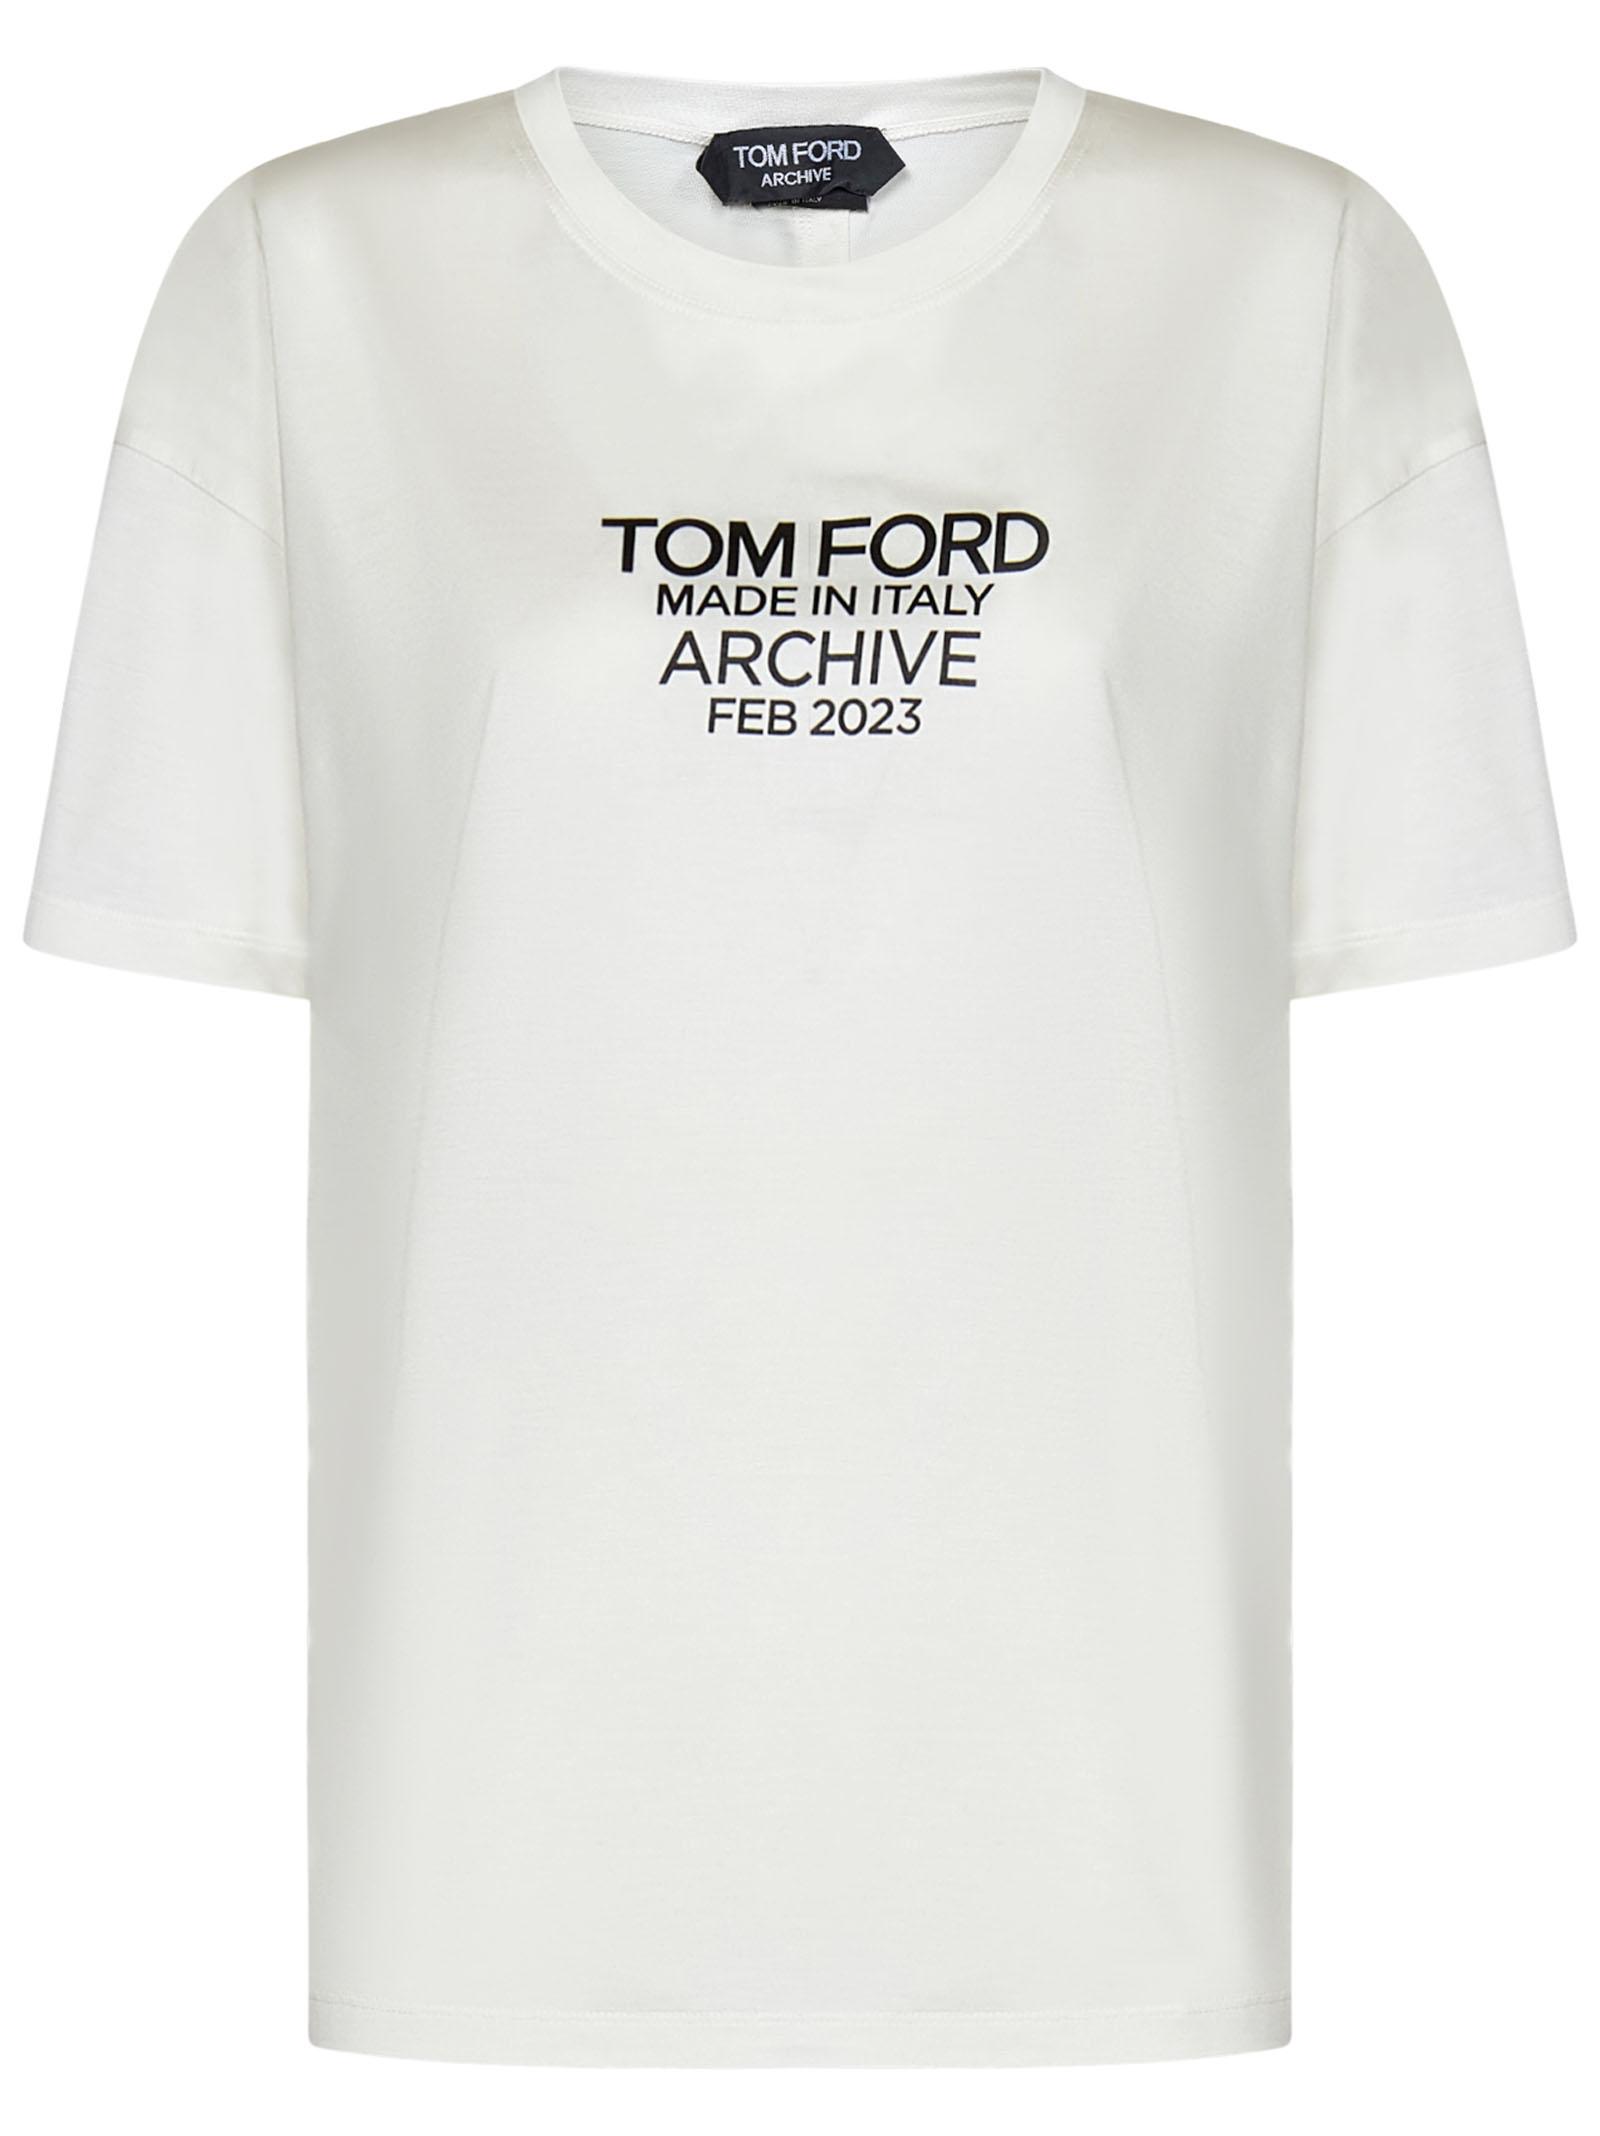 Tom Ford T-shirt in White | Lyst